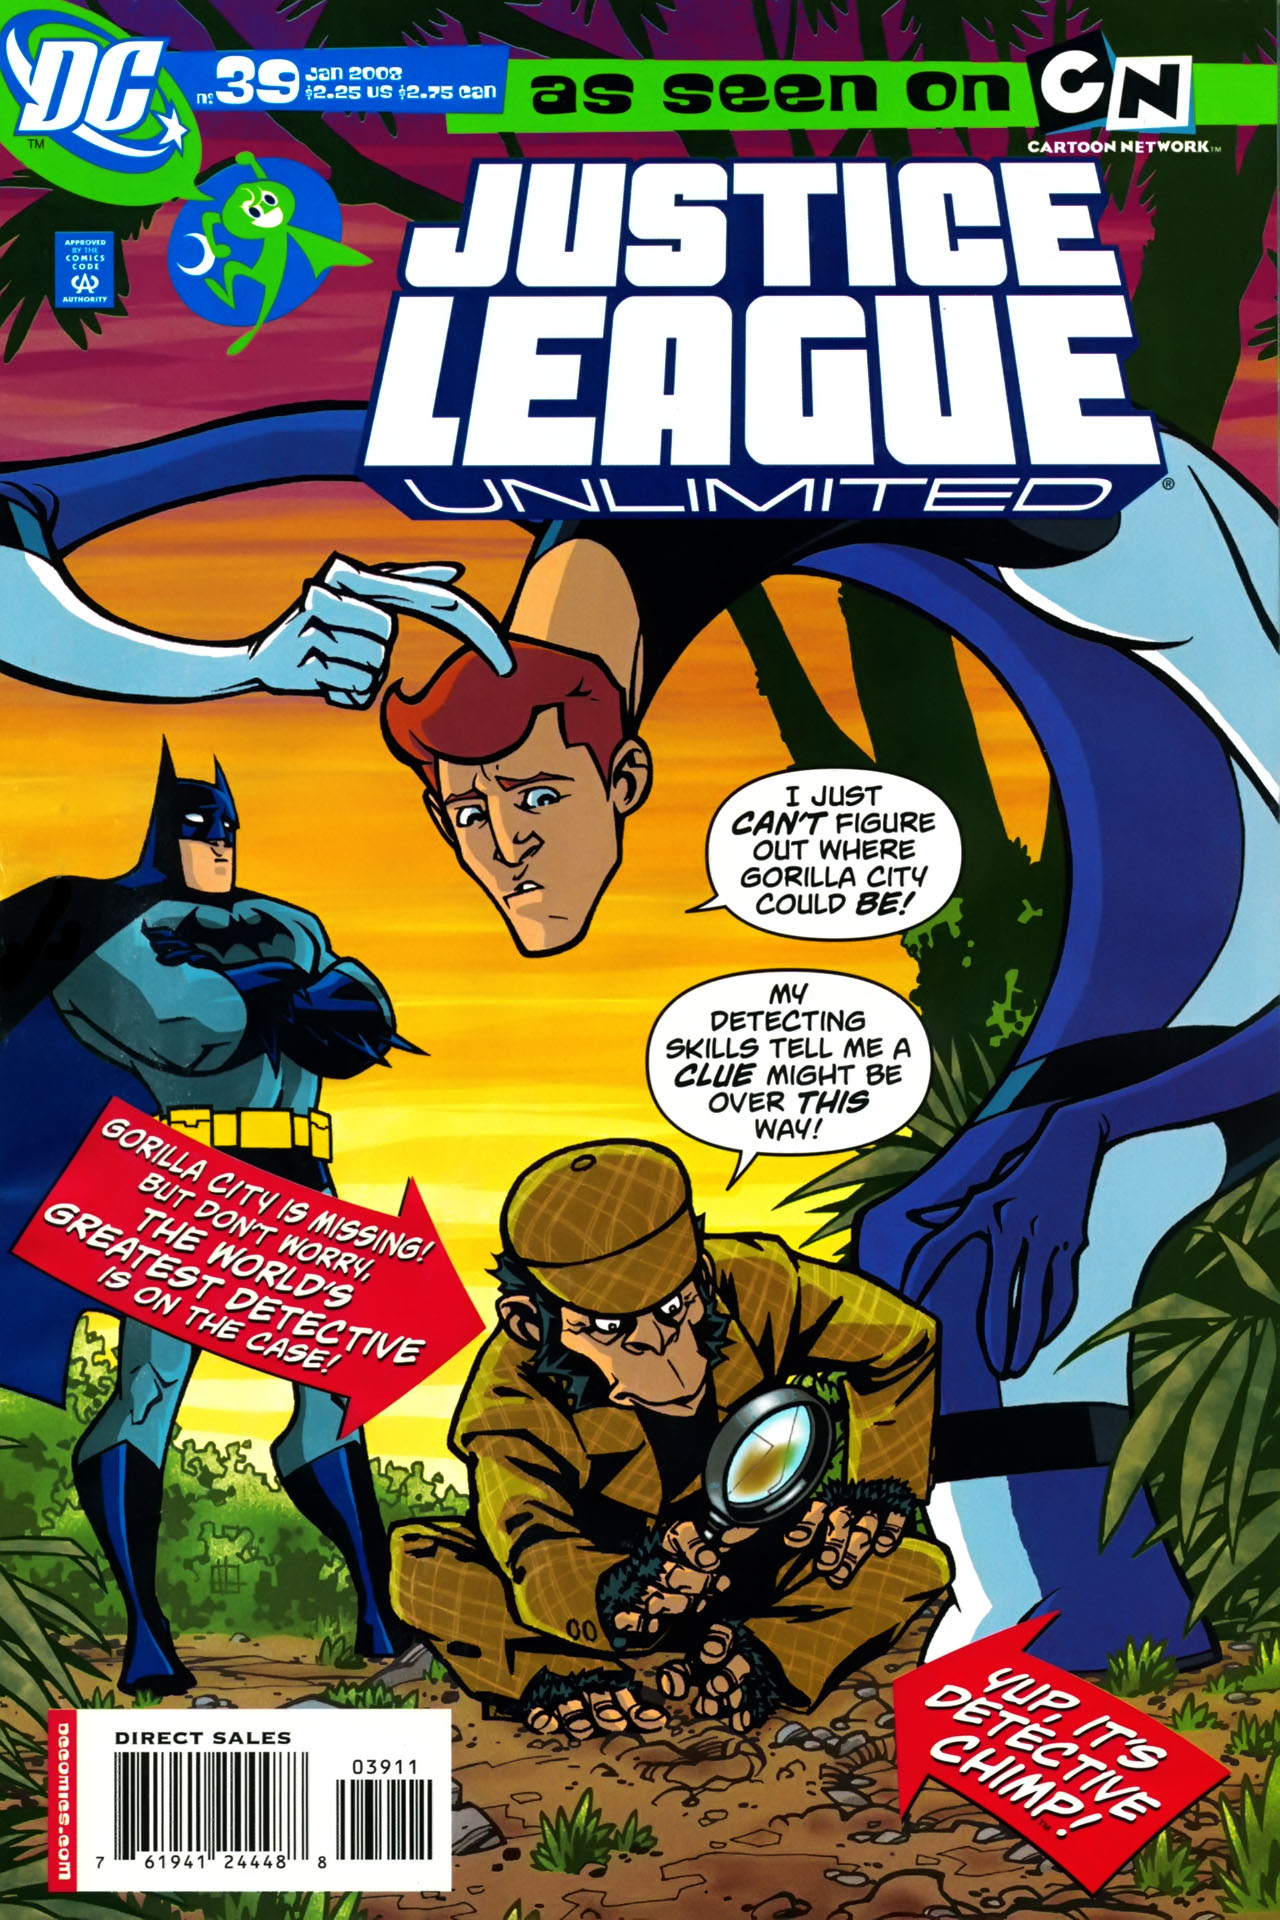 Read online Justice League Unlimited comic -  Issue #39 - 1